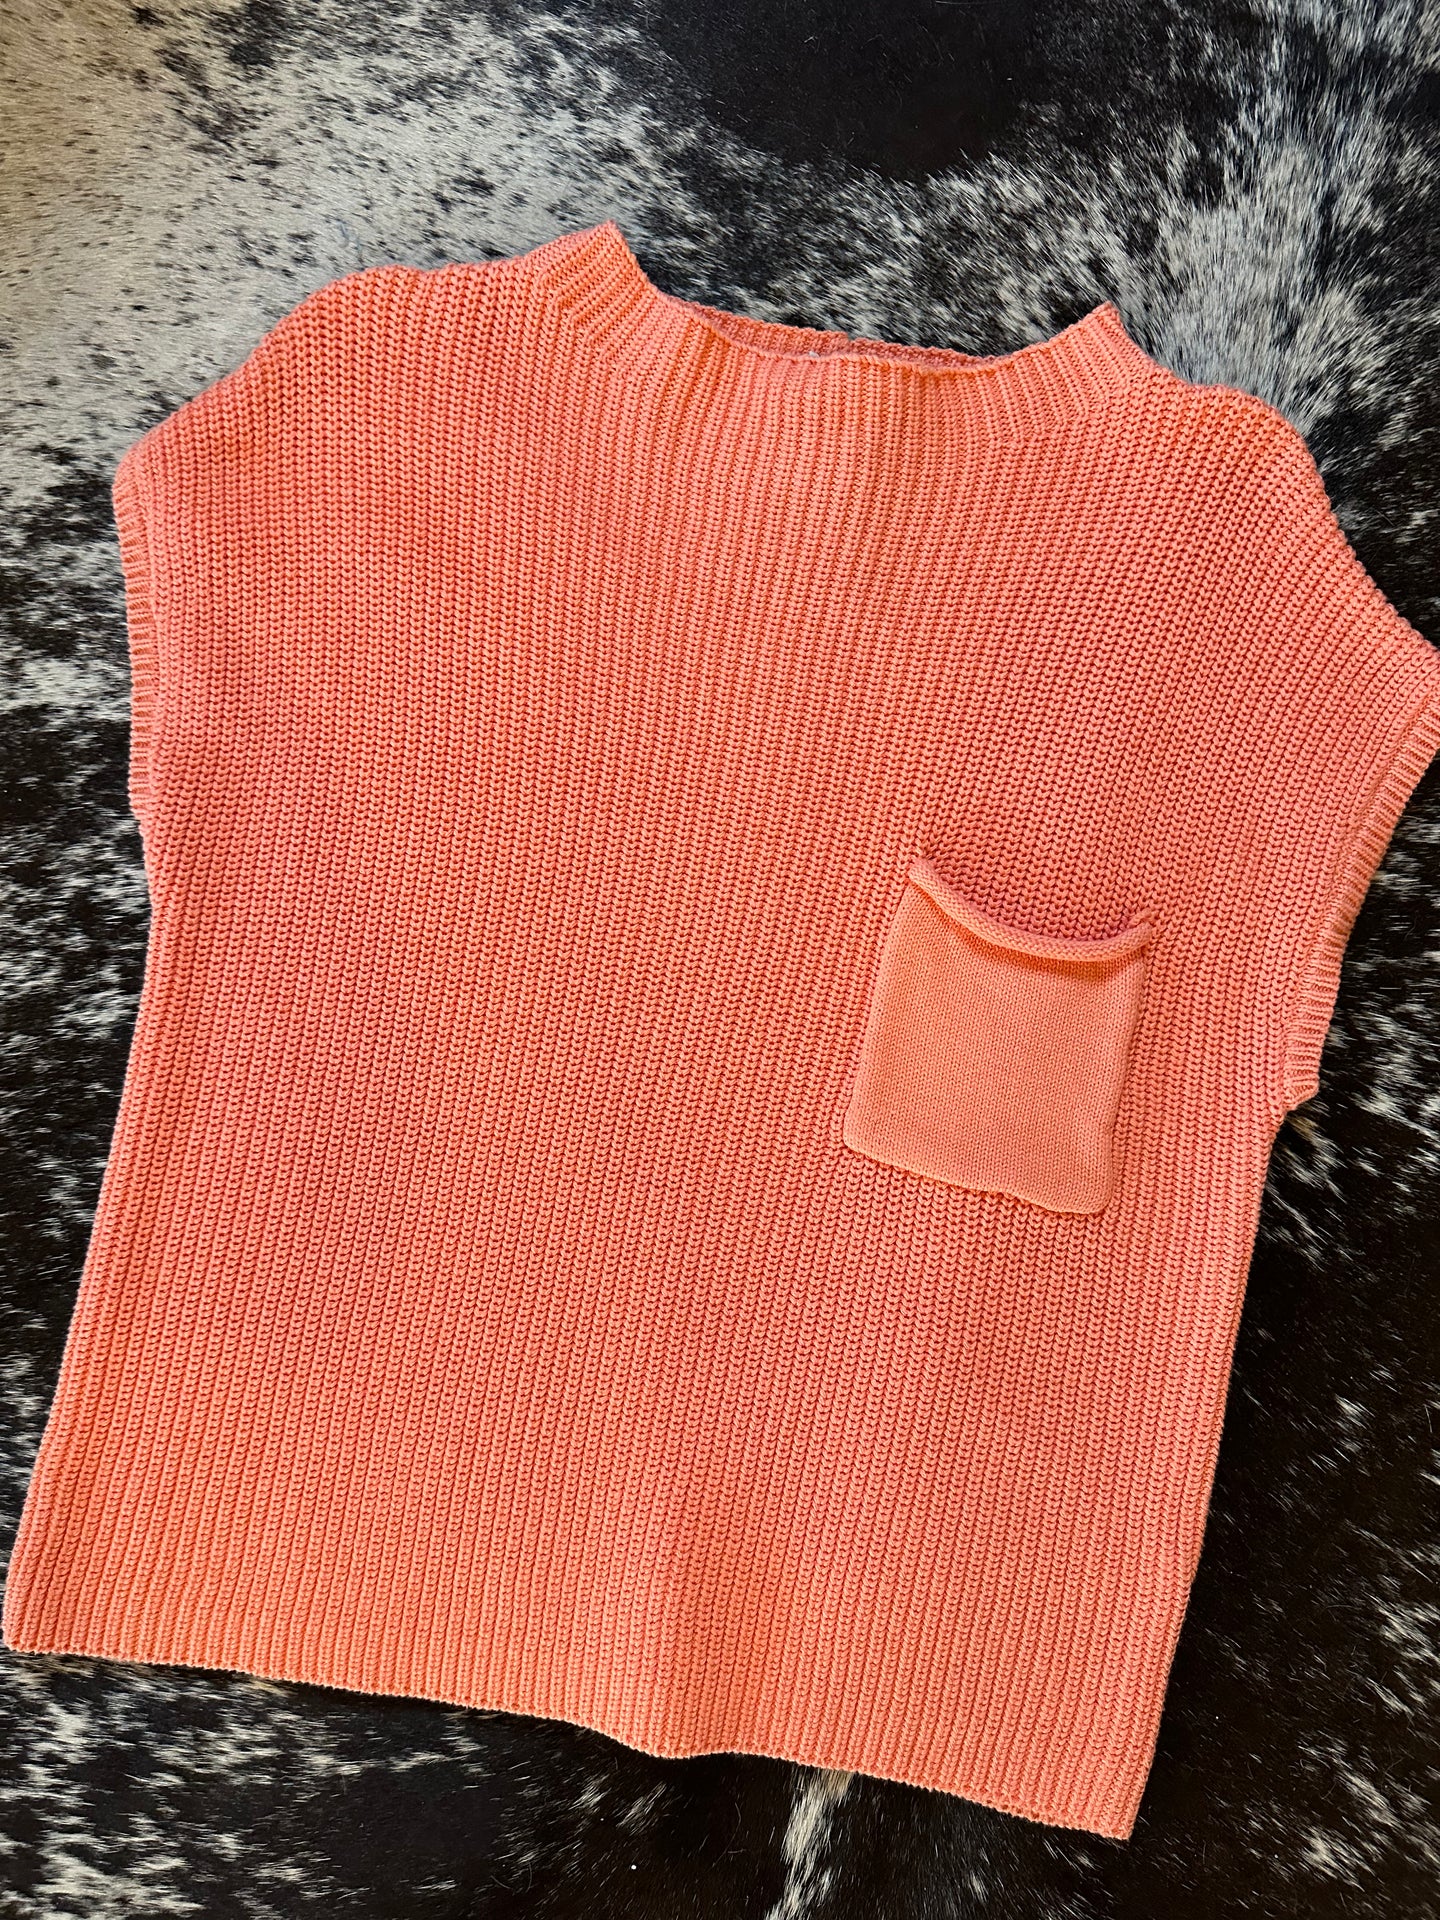 Coral Short-Sleeve Knit Sweater